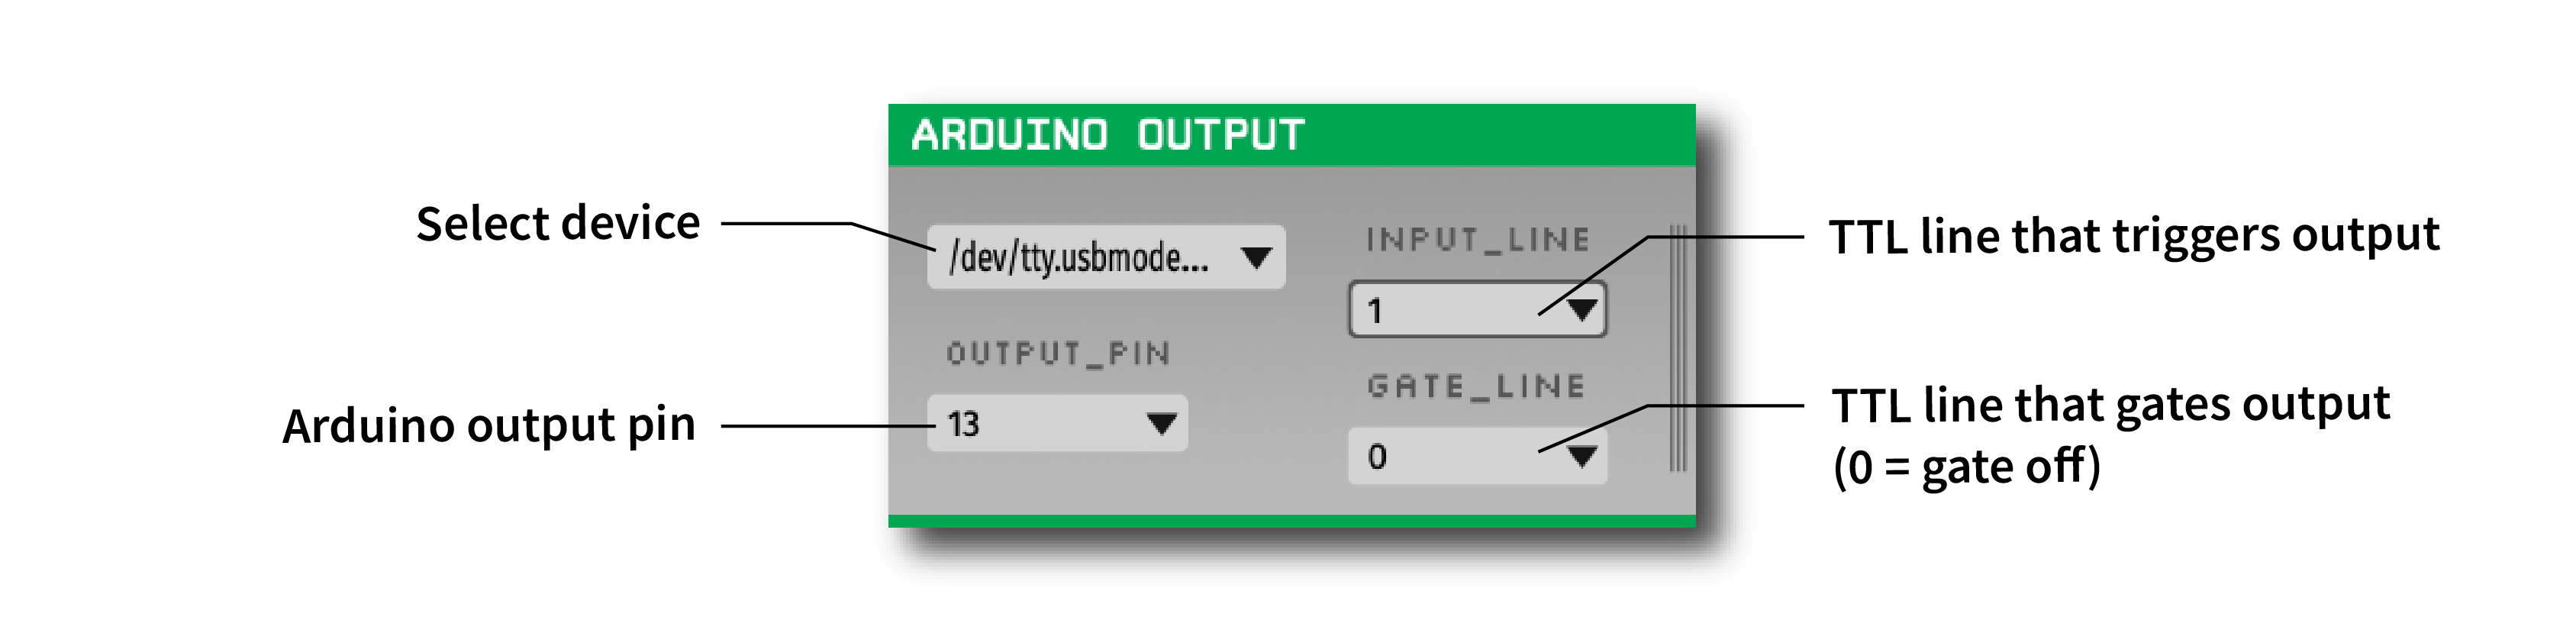 Annotated Arduino Output settings interface